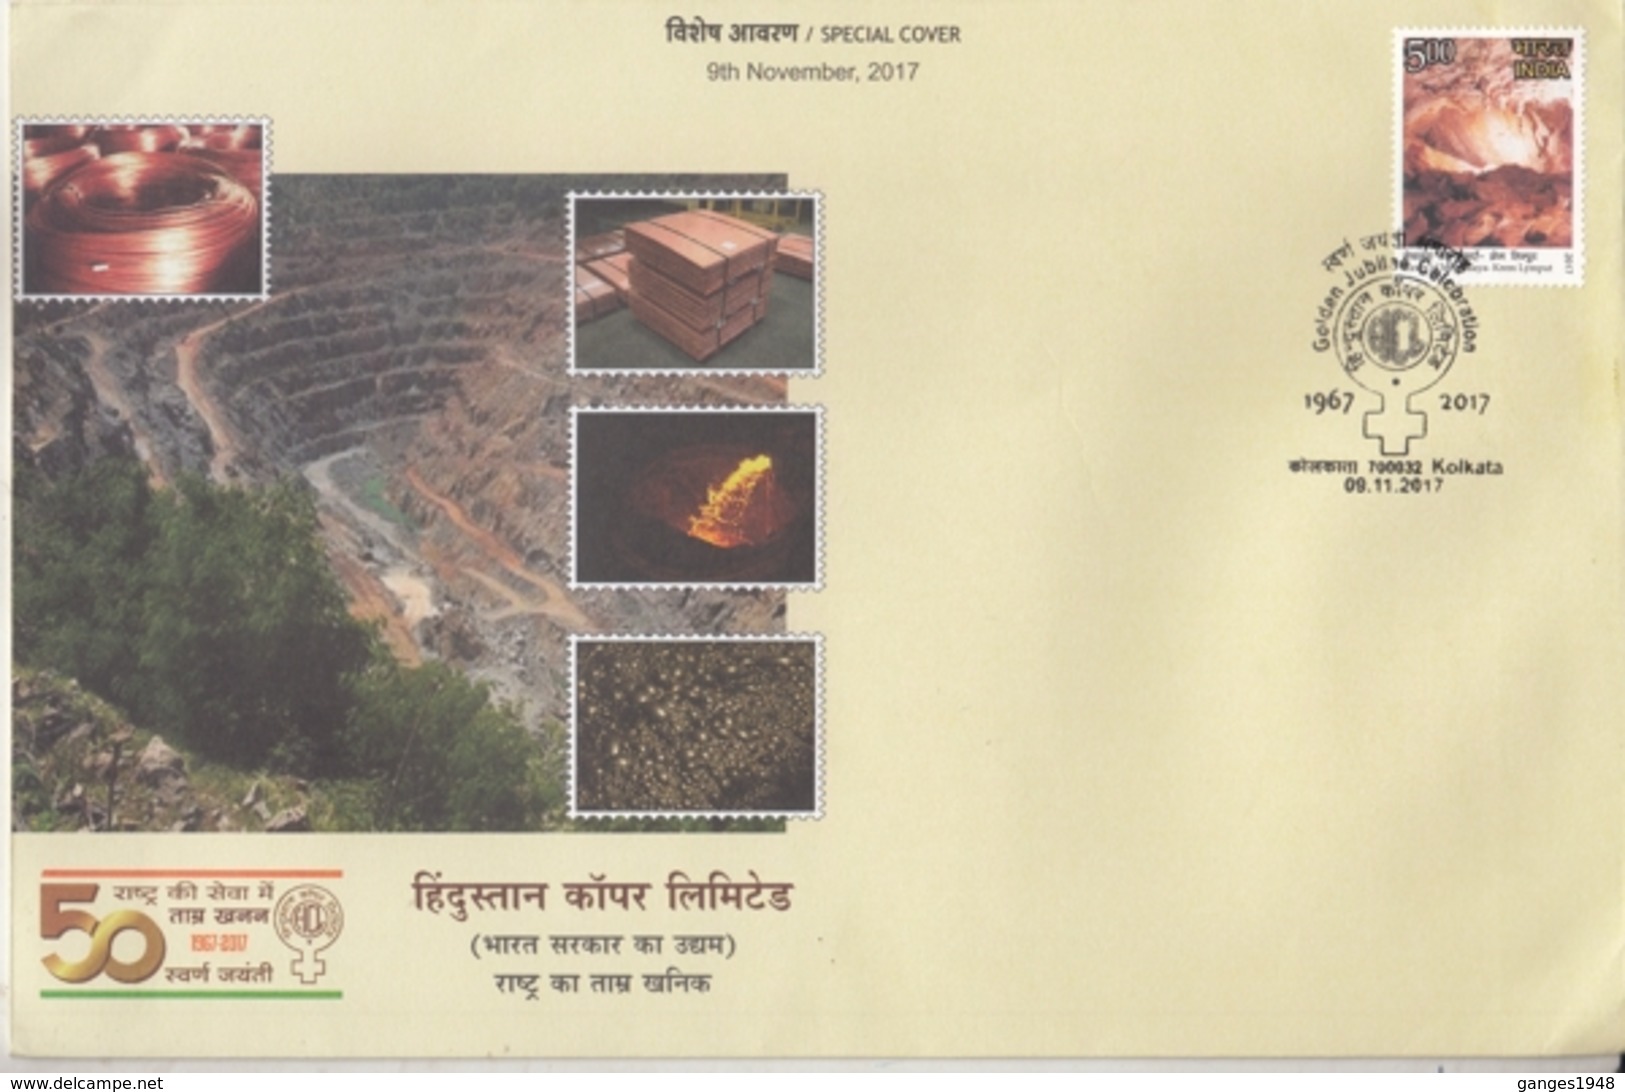 India 2017  Mines & Minerals  Copper  Mining   Cpper Wires  Kolkata  Special Cover  # 16104  D  Inde Indien - Minerals